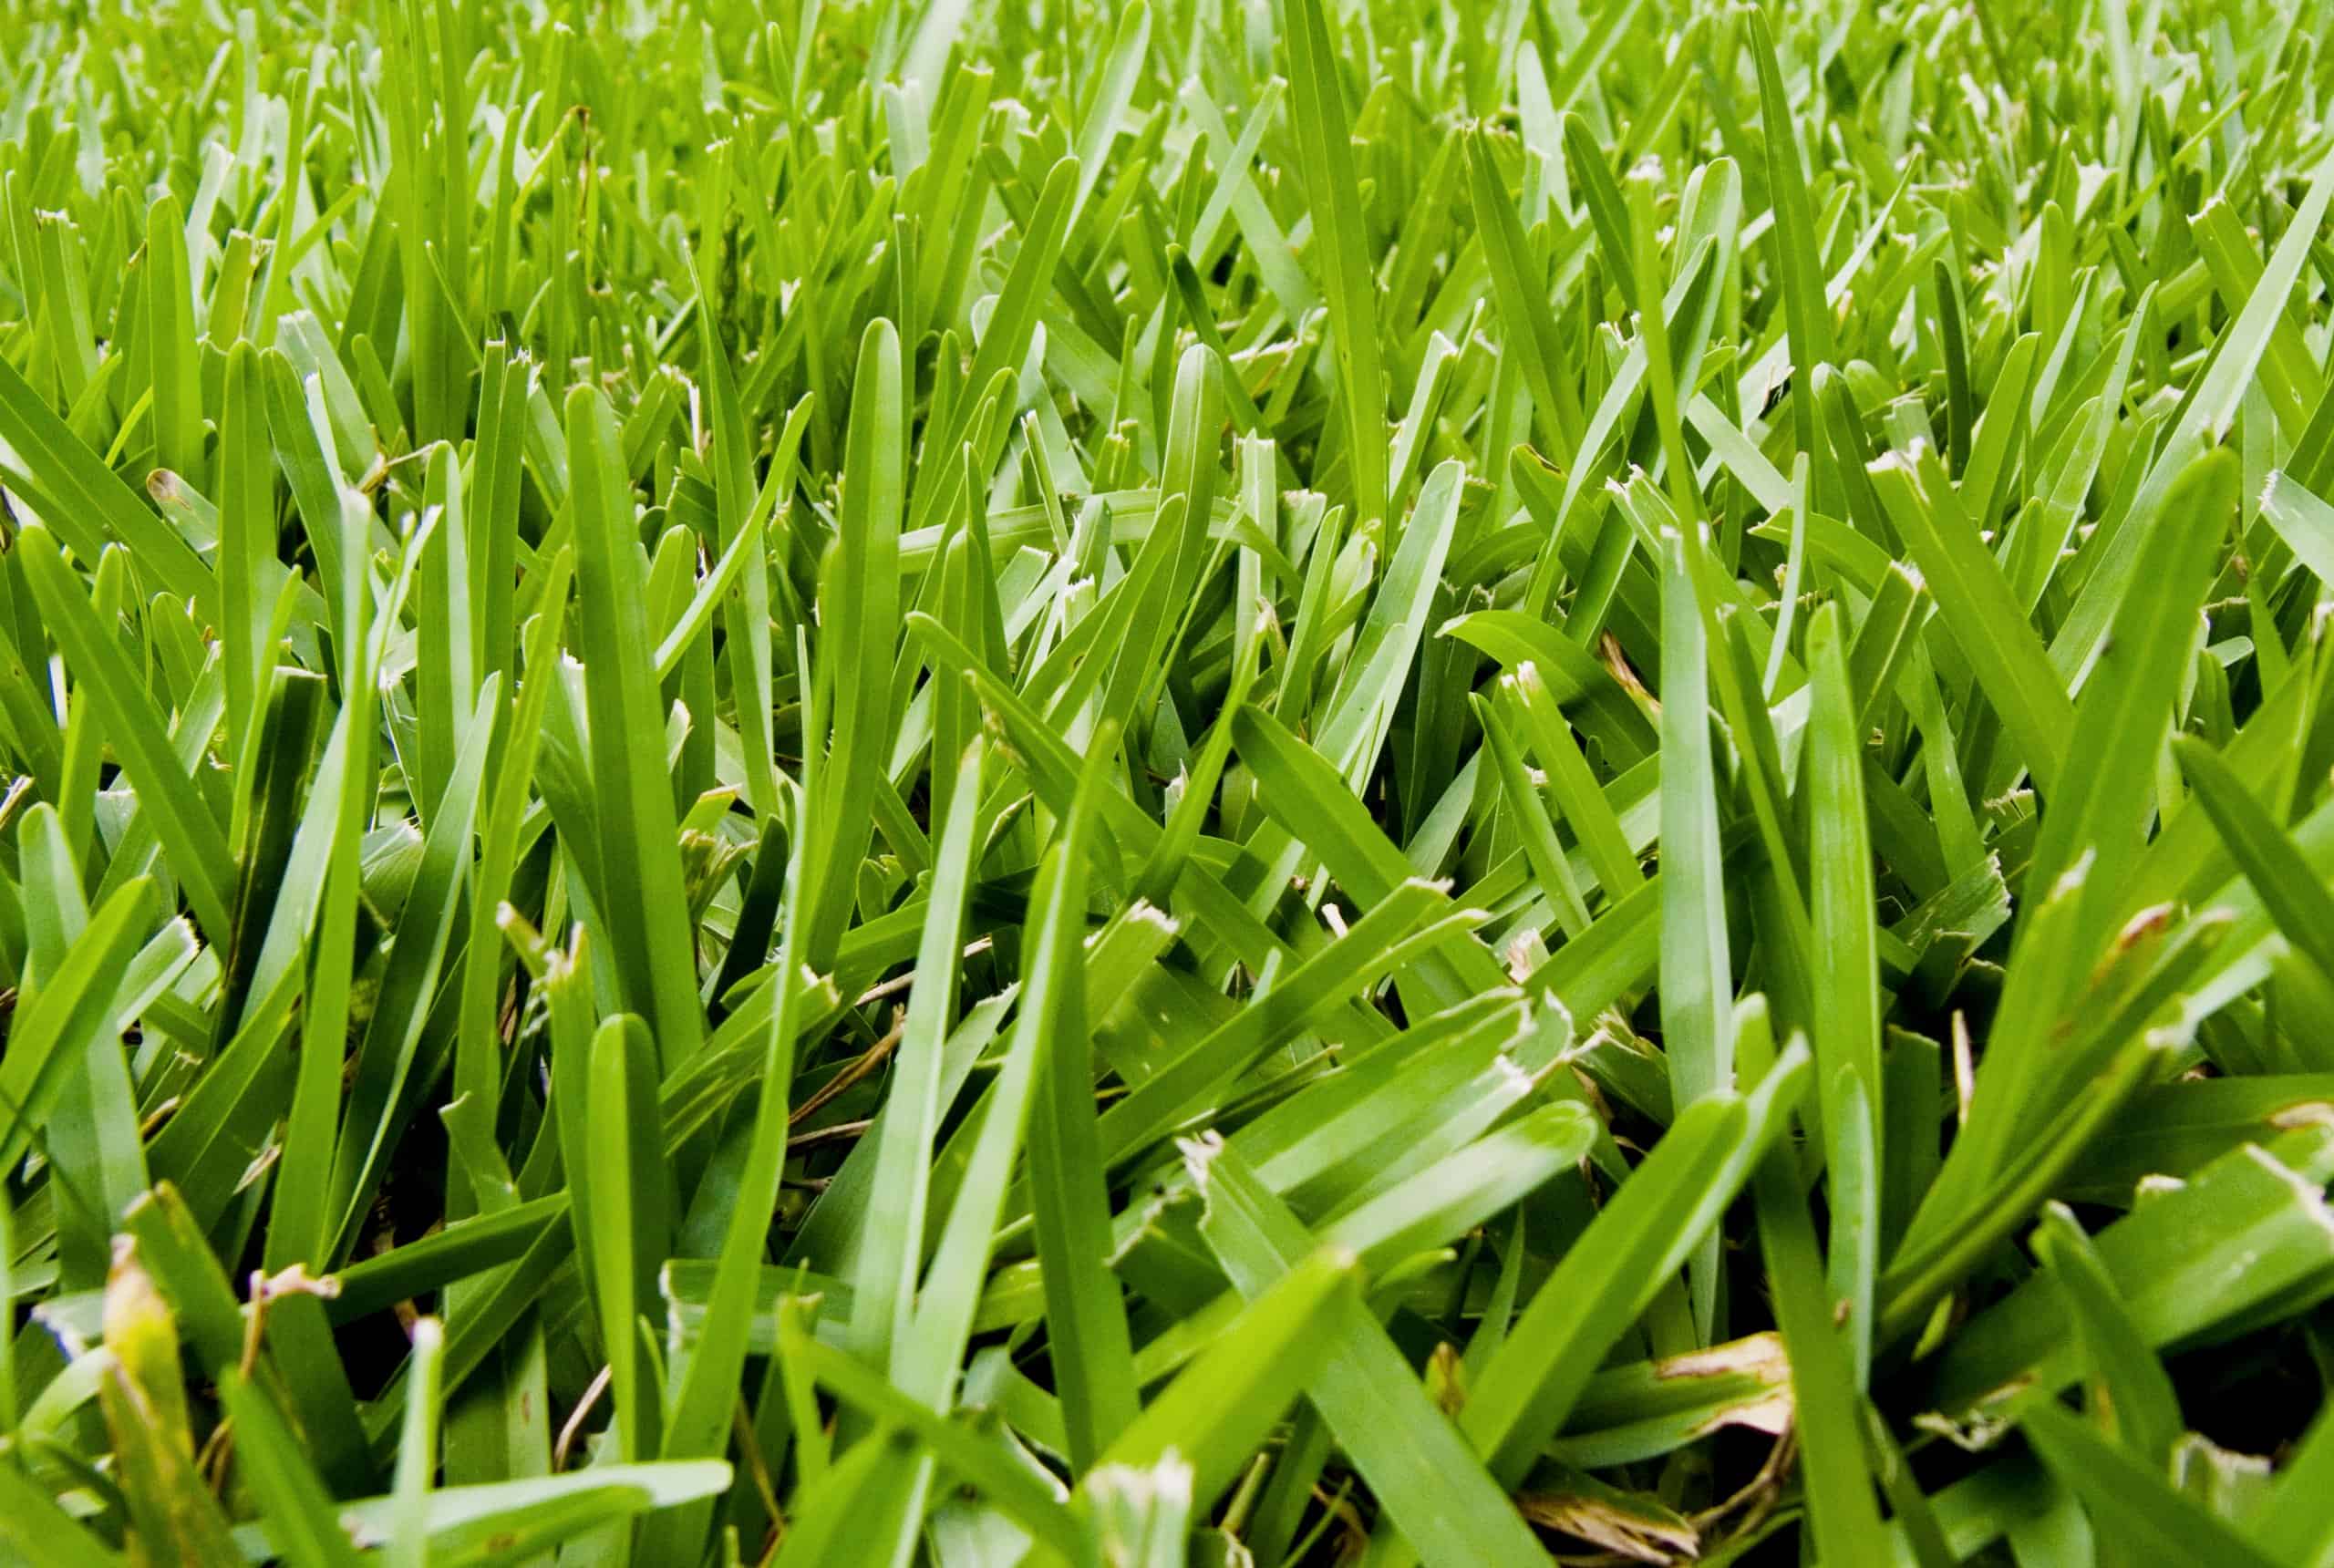 Green Grass from the Best Lawn Care